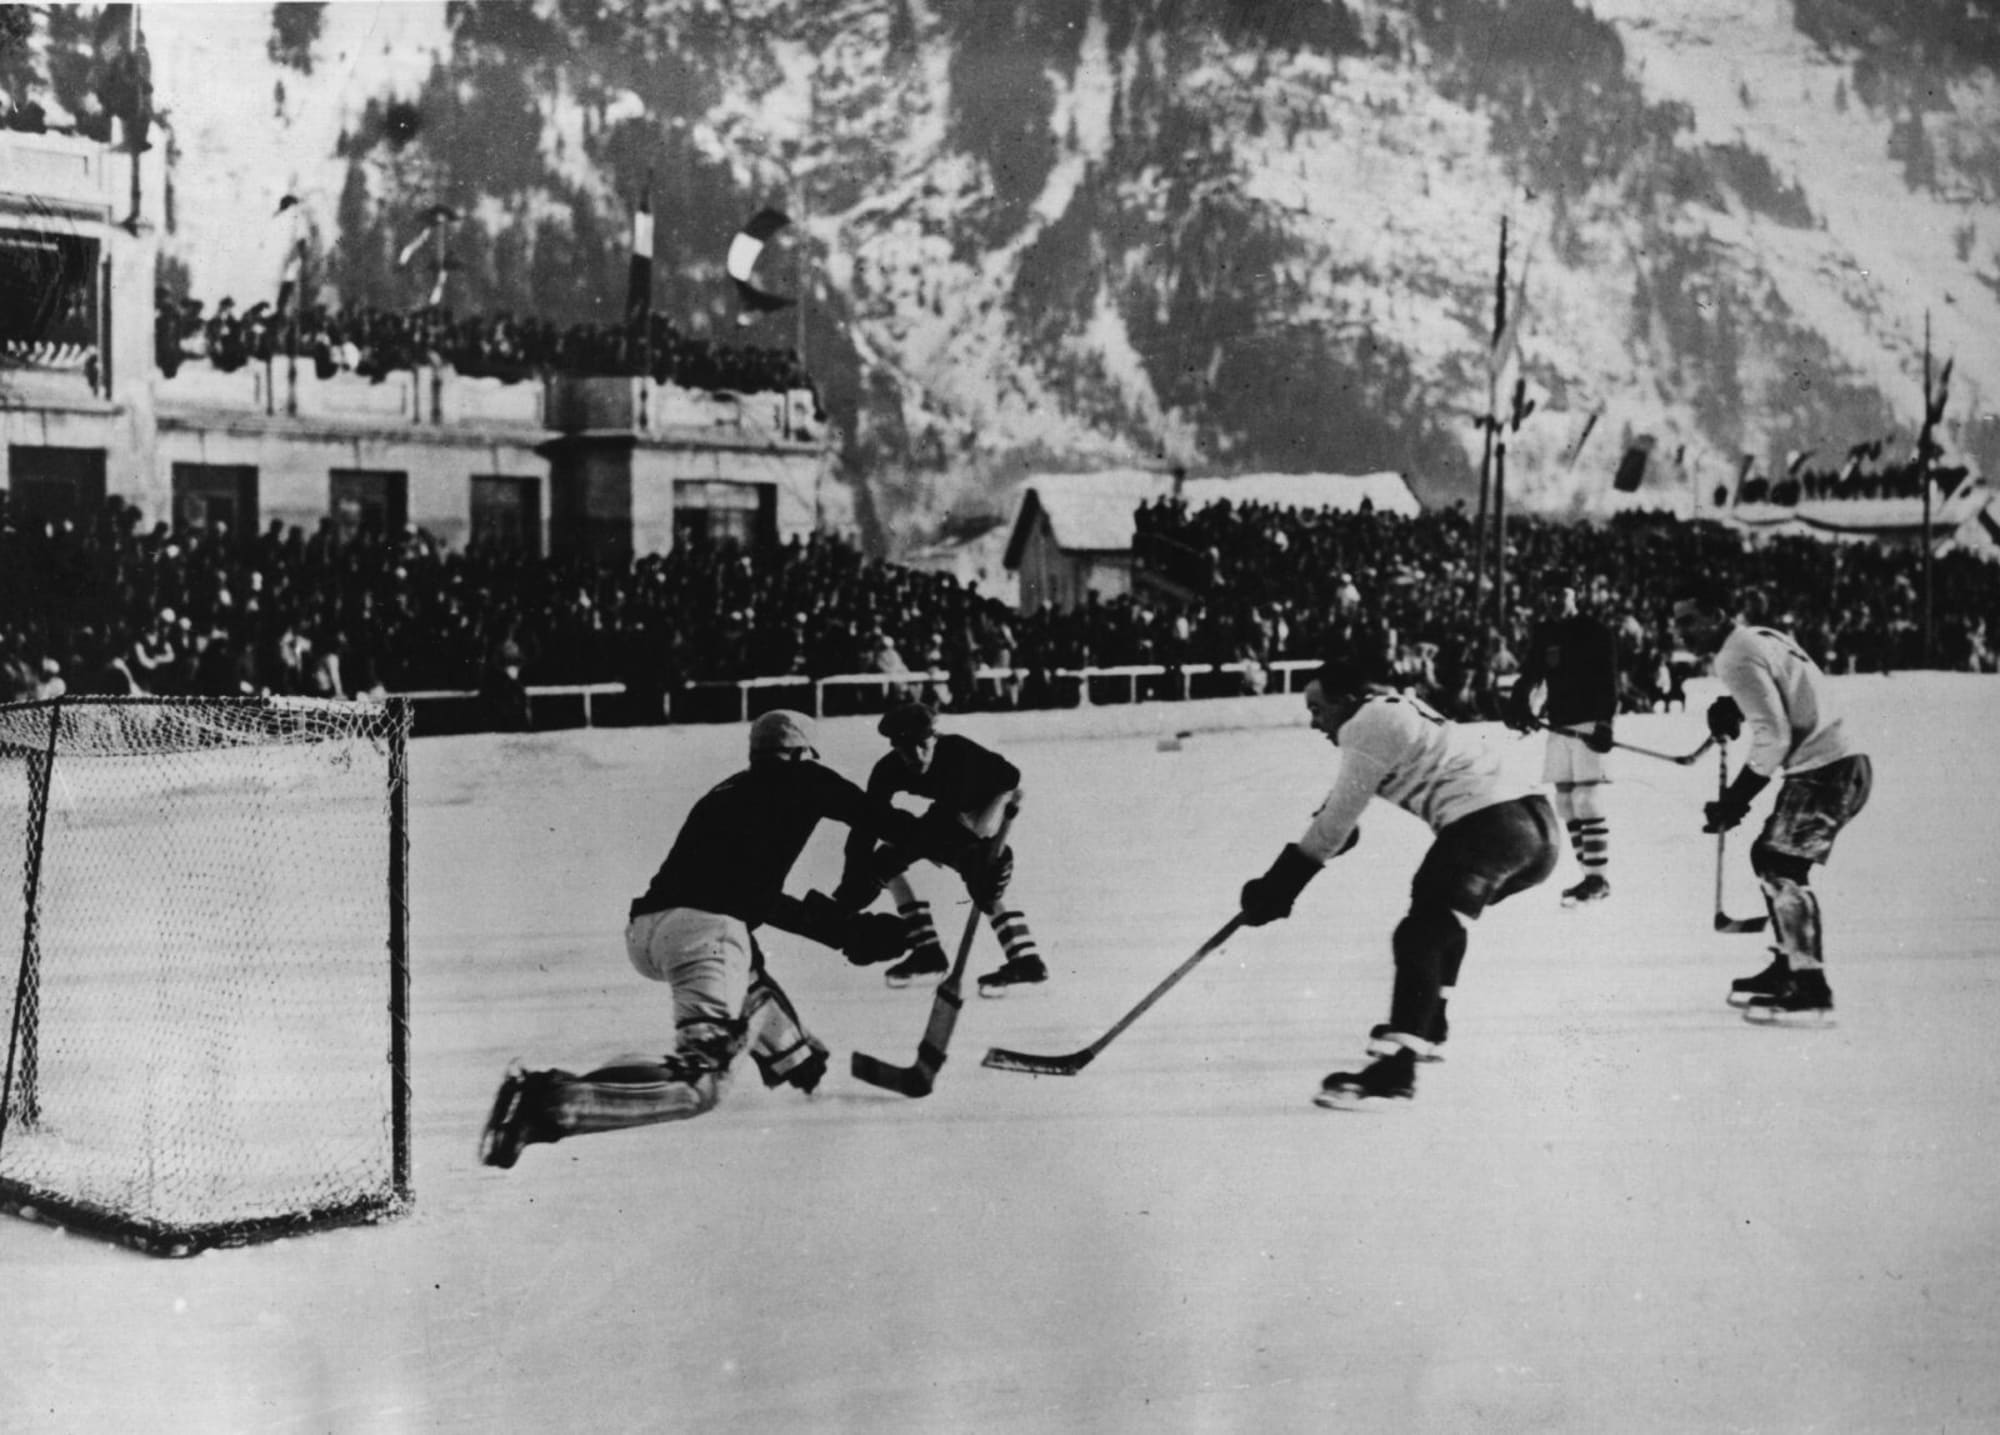 This Day in Hockey History – June 16, 1946 – Turk's Day